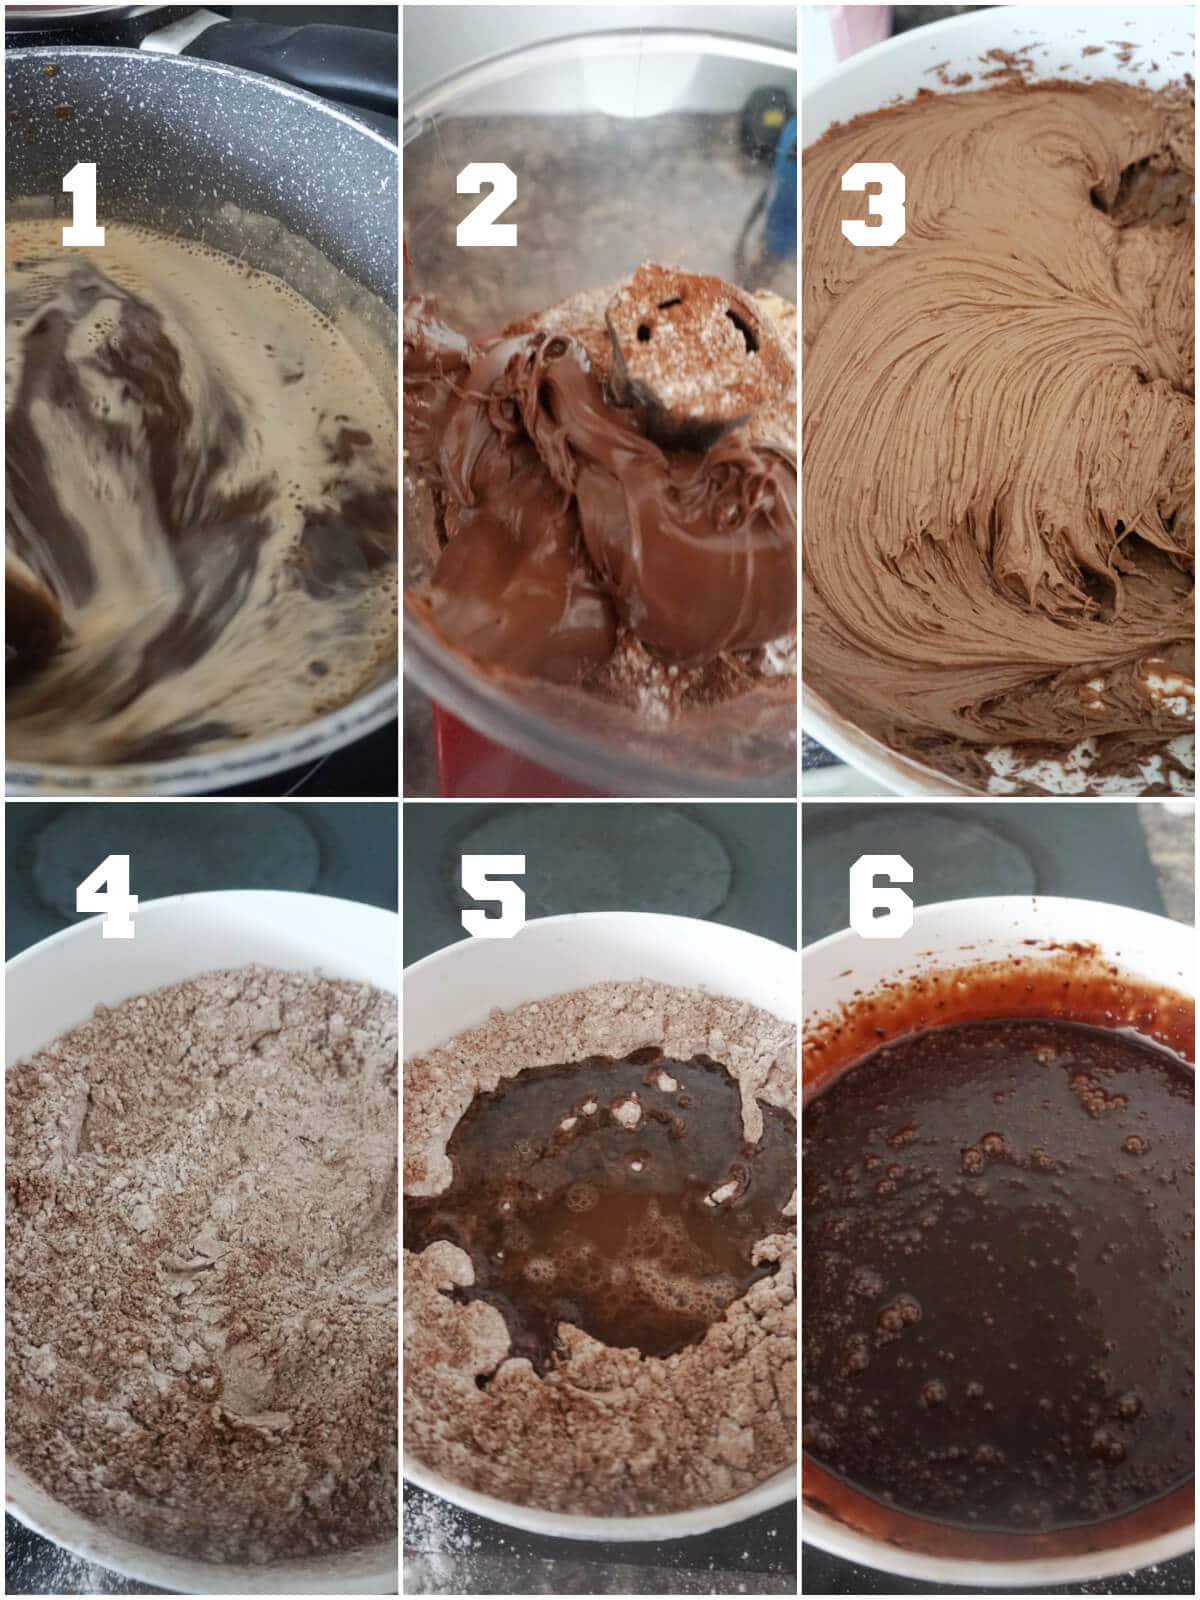 Collage of 6 photos to show how to make nutella filling and chocolate glaze.